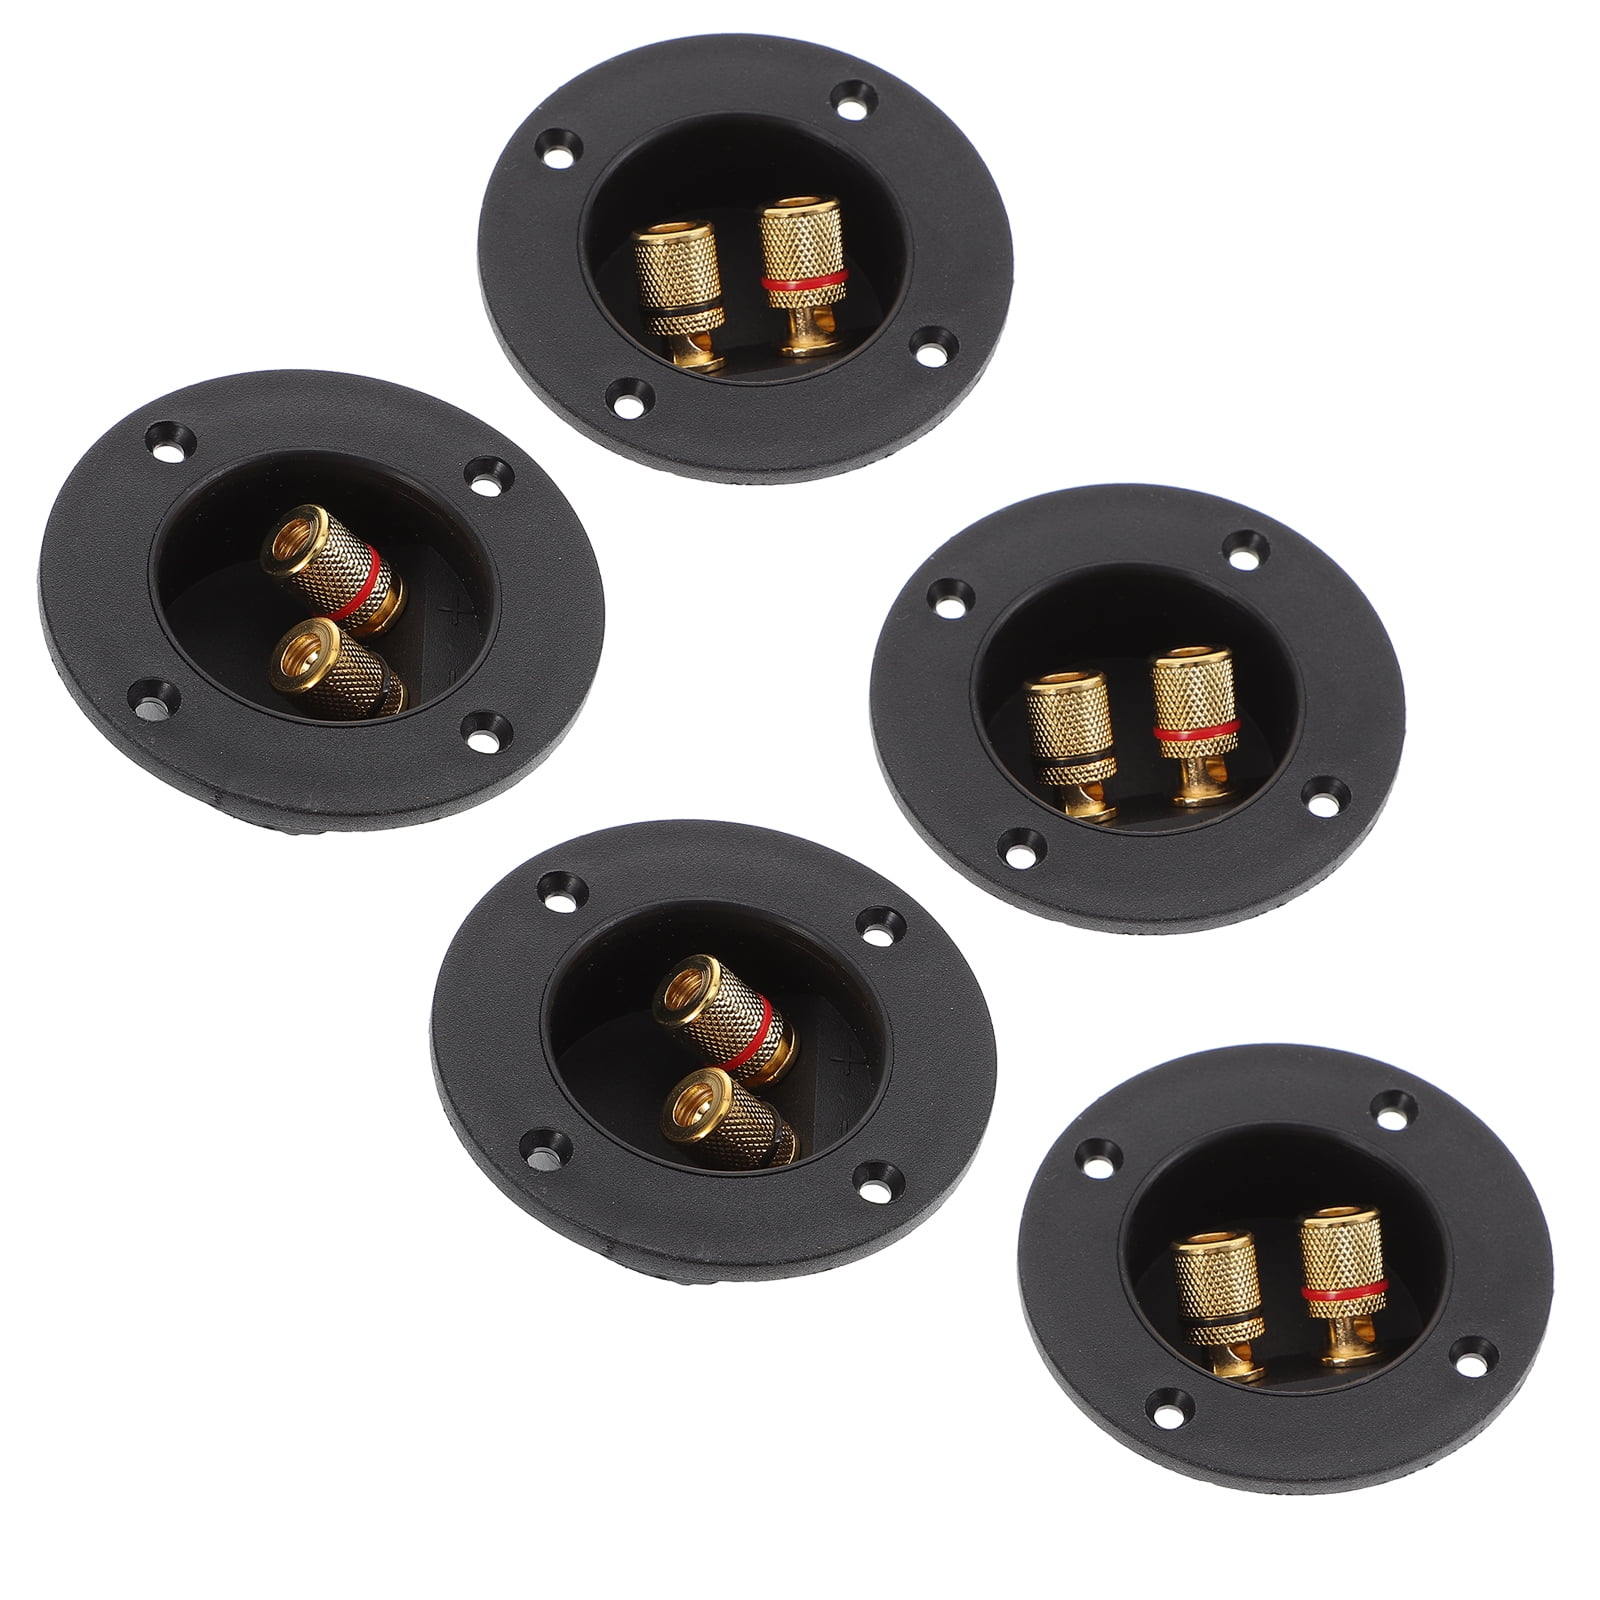 Black 5pcs DIY Home Car Stereo 2-Way Speaker Box Terminal Binding Post Round Spring Cup Connectors Subwoofer Plugs 